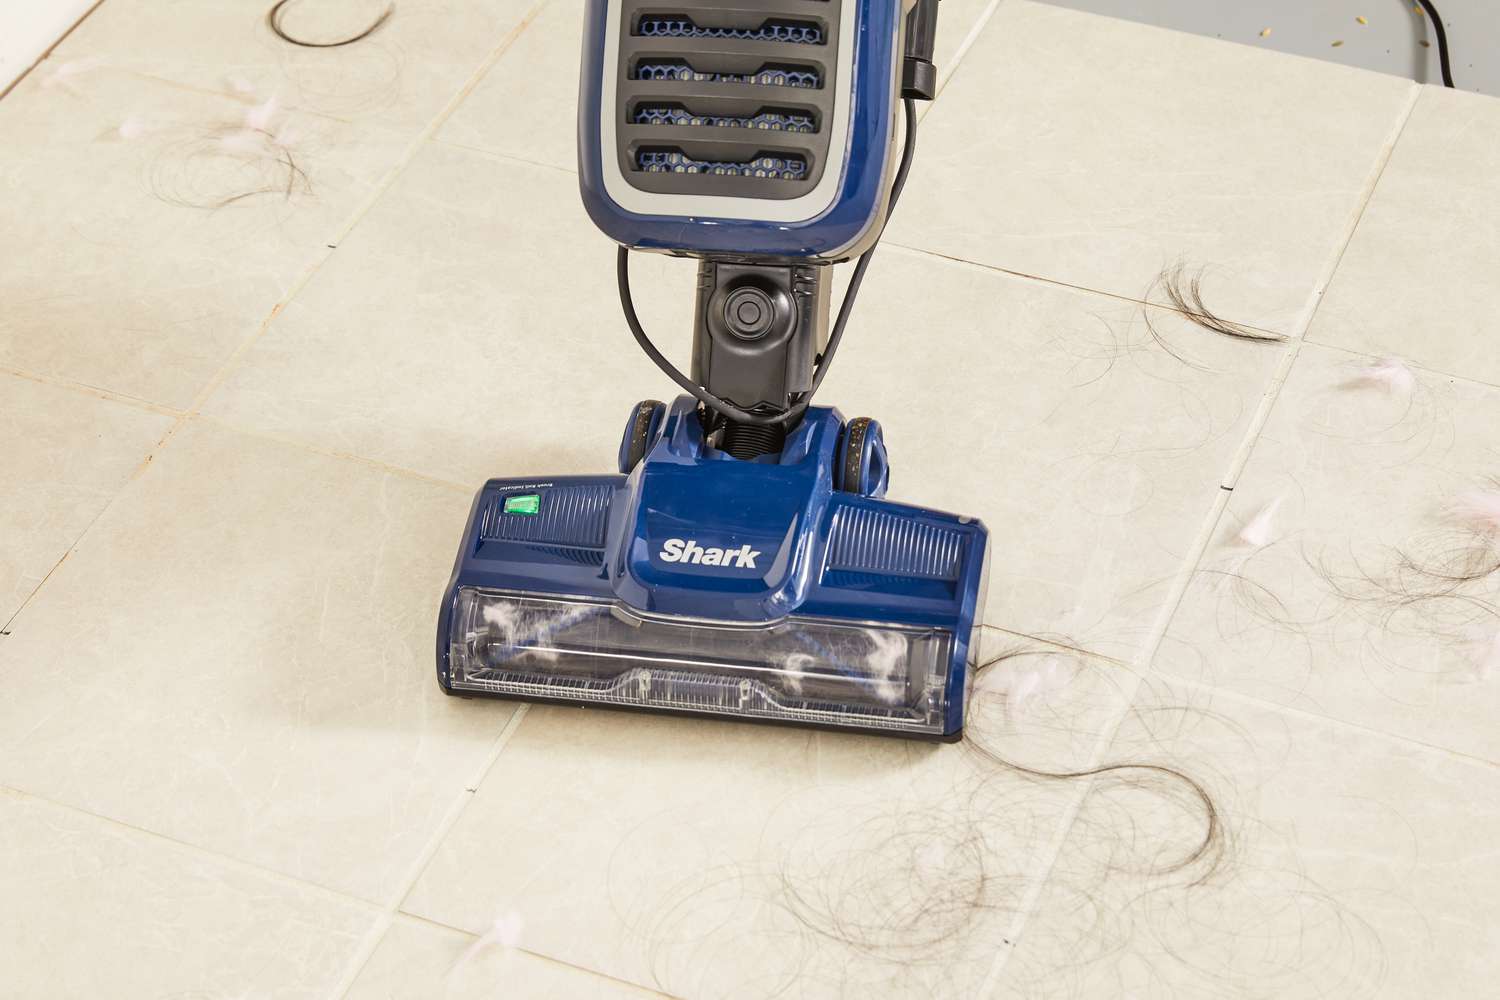 Shark NV151 Navigator Swivel Pro Complete Upright Vacuum used to clean the hair on the tile floor